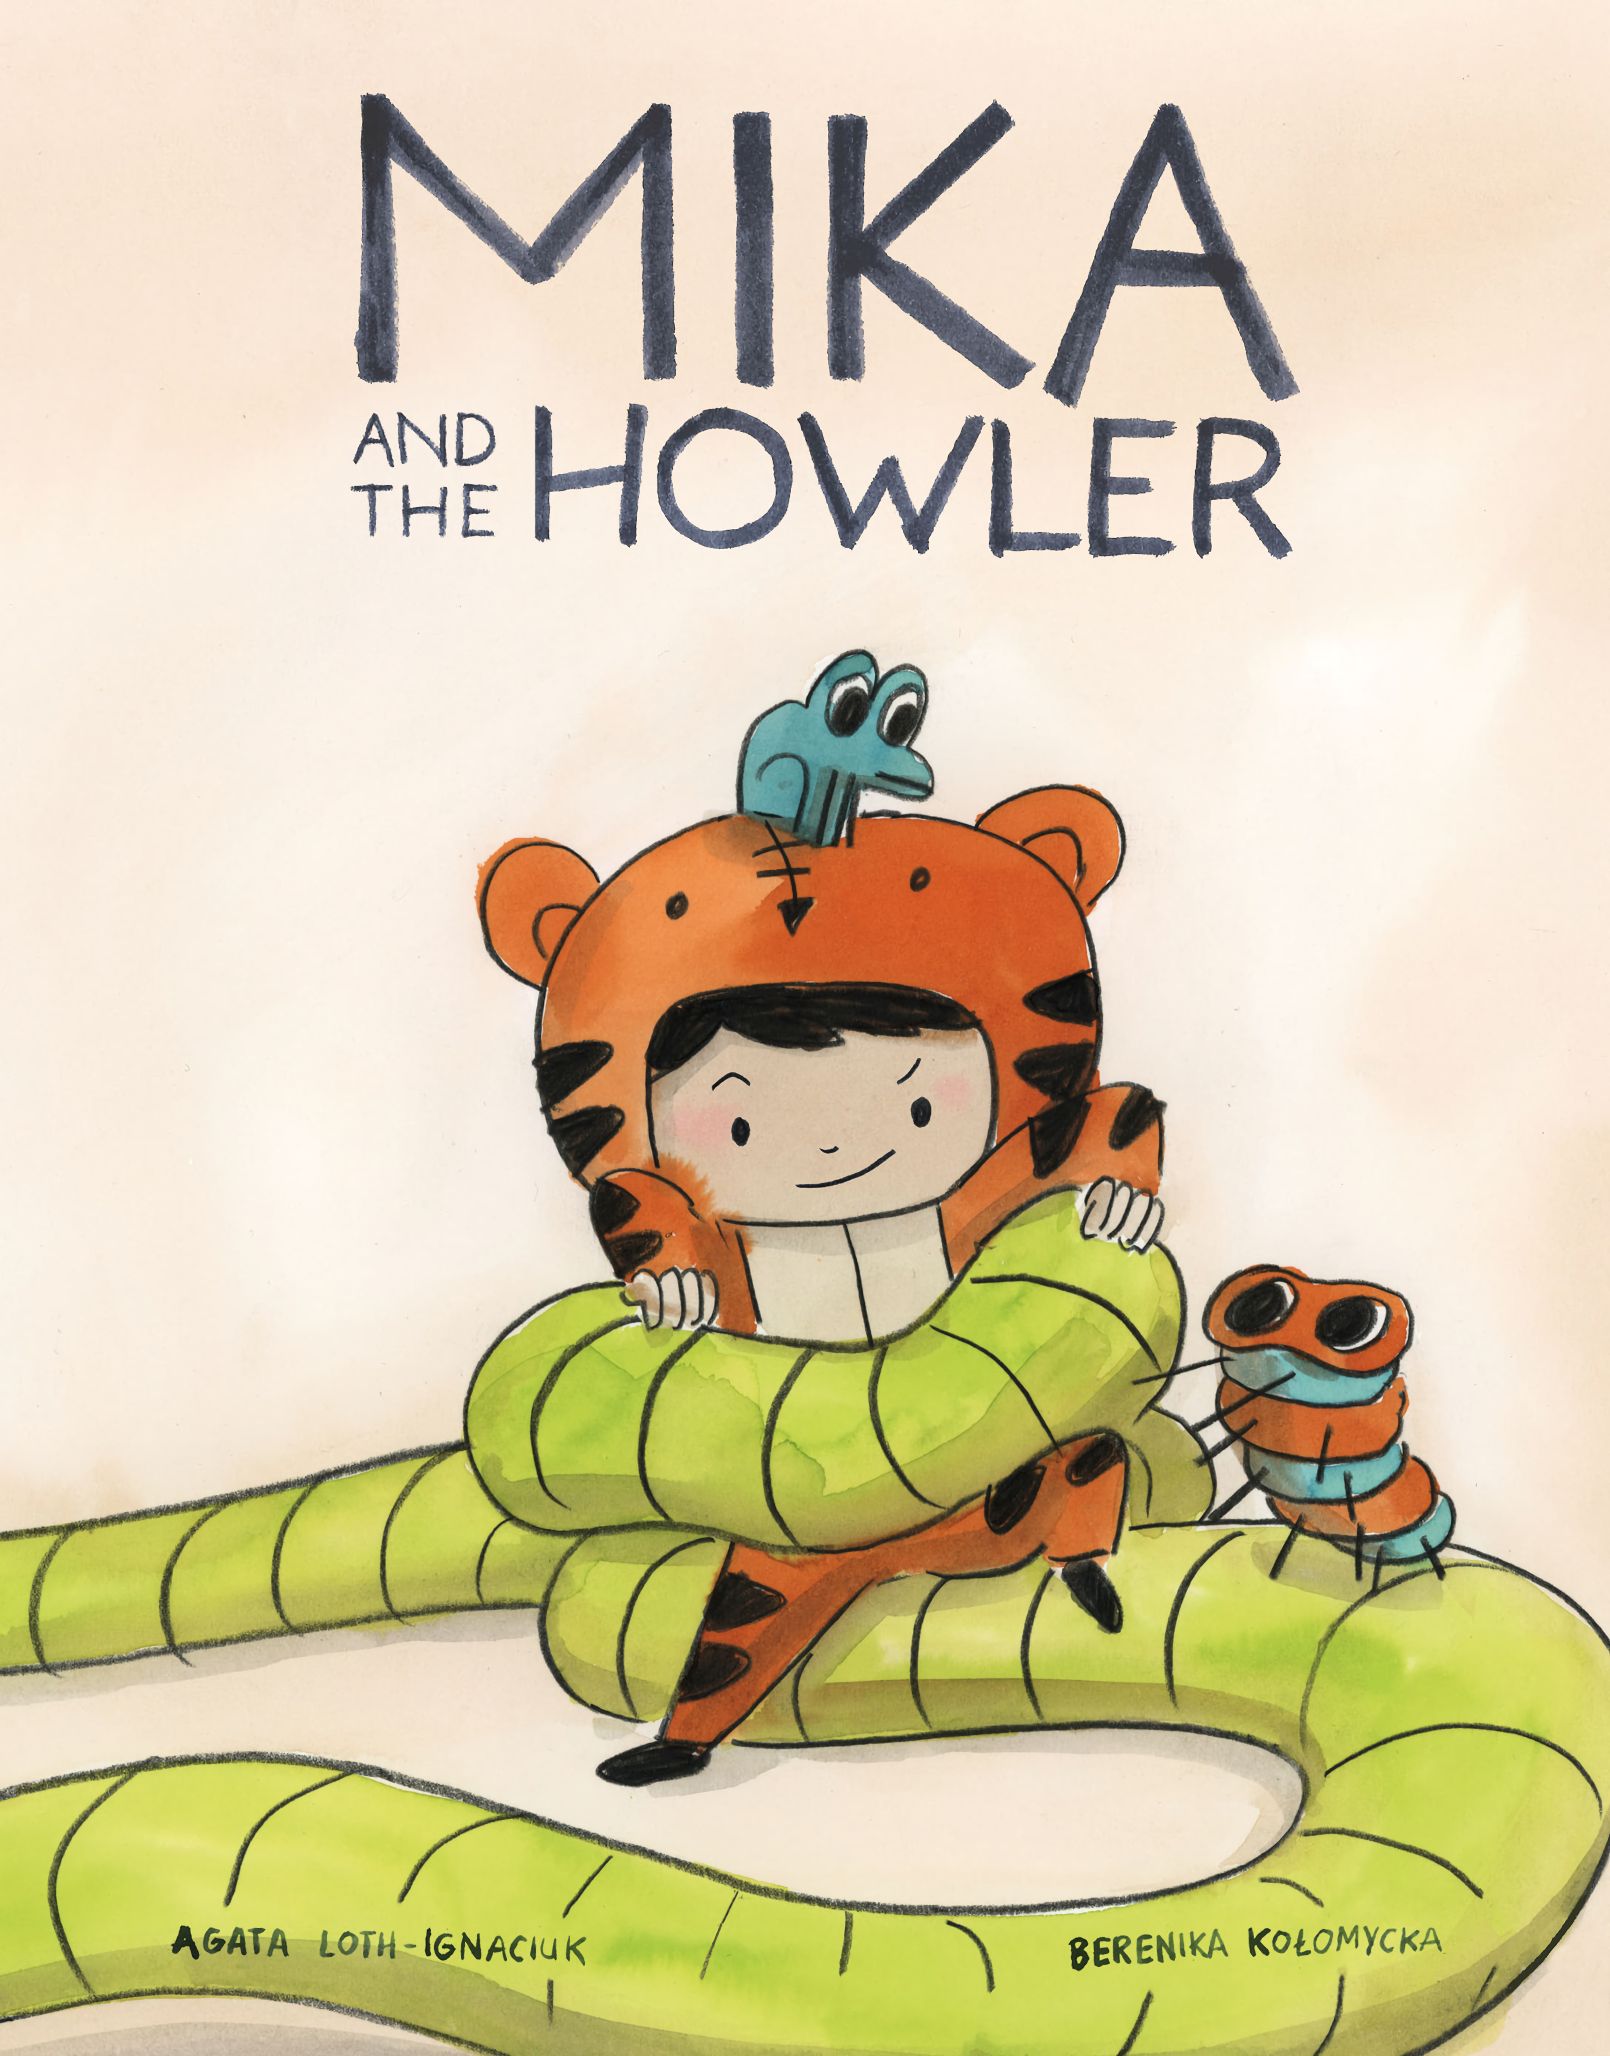 Read online Mika and the Howler comic -  Issue # Full - 1